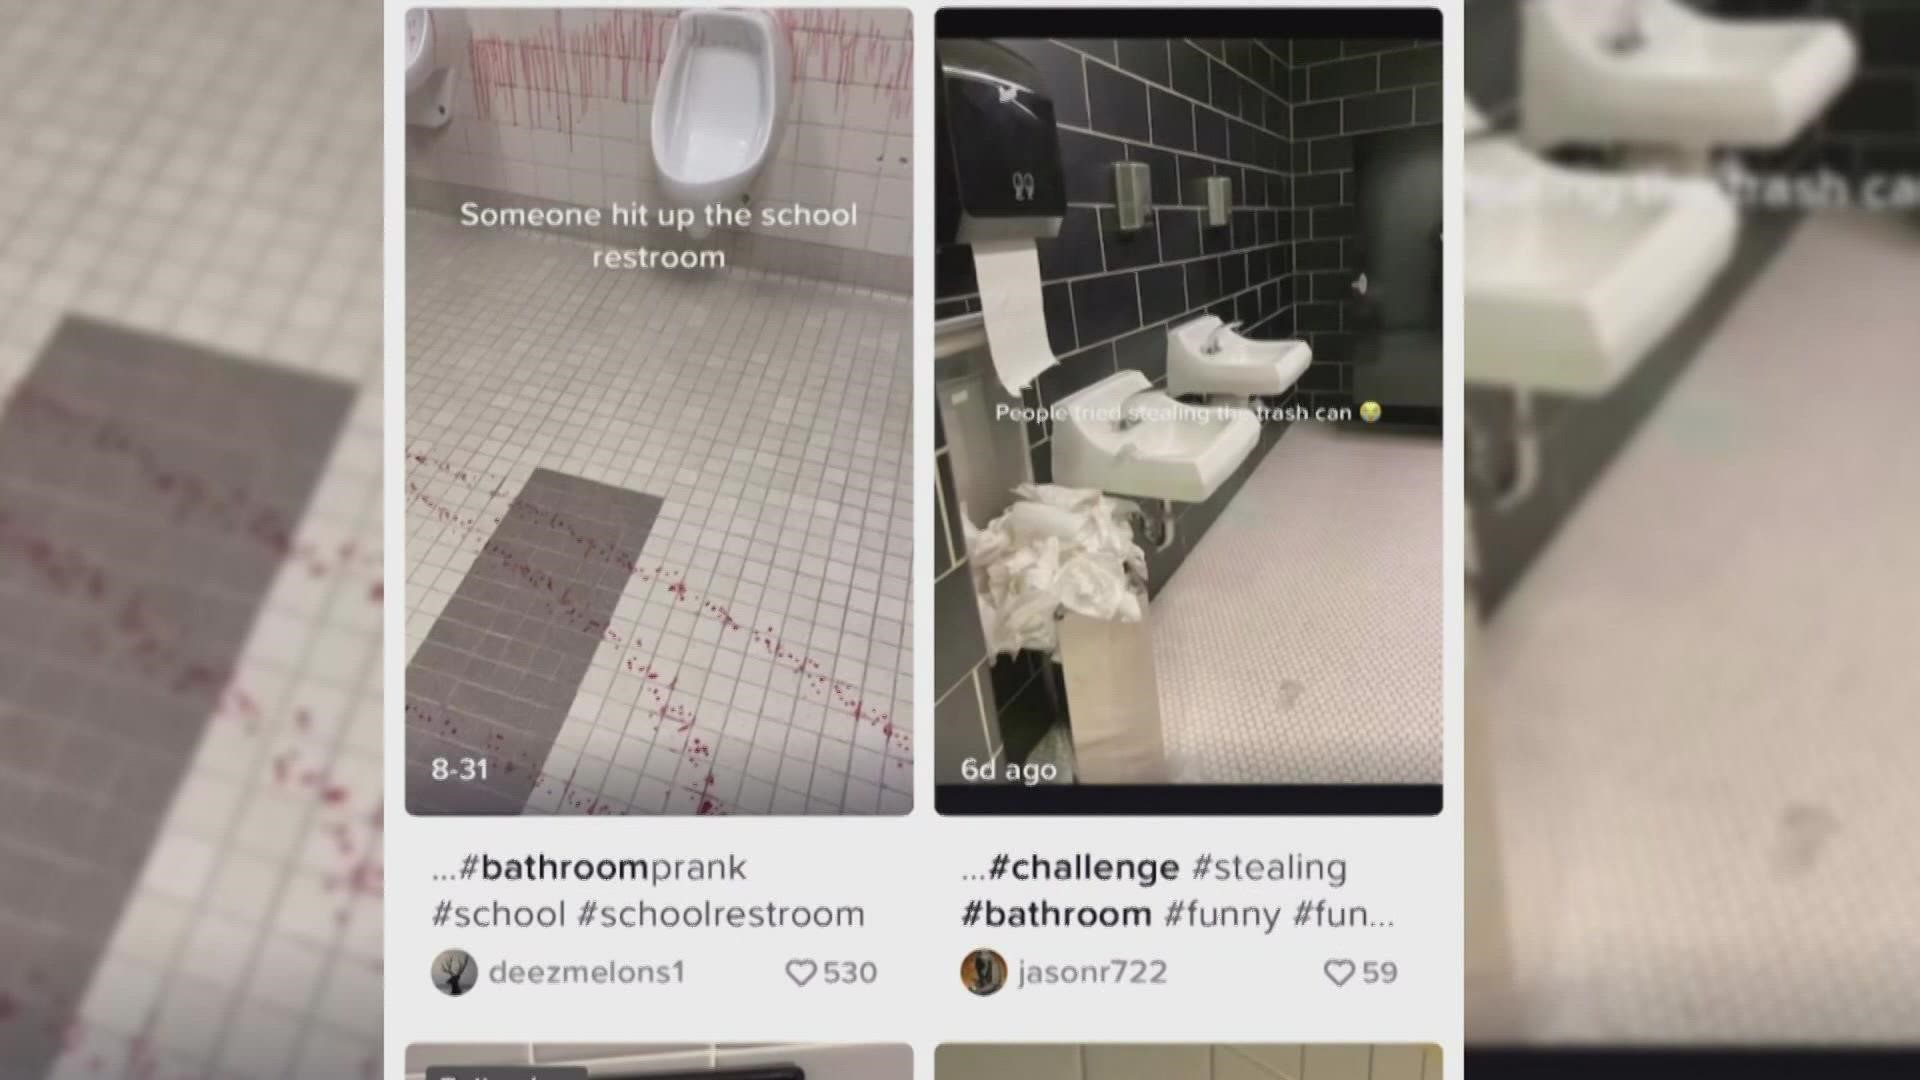 Several districts have reportedly been dealing with the "Devious Lick" or "Bathroom Challenge" trend where students steal common objects from school.